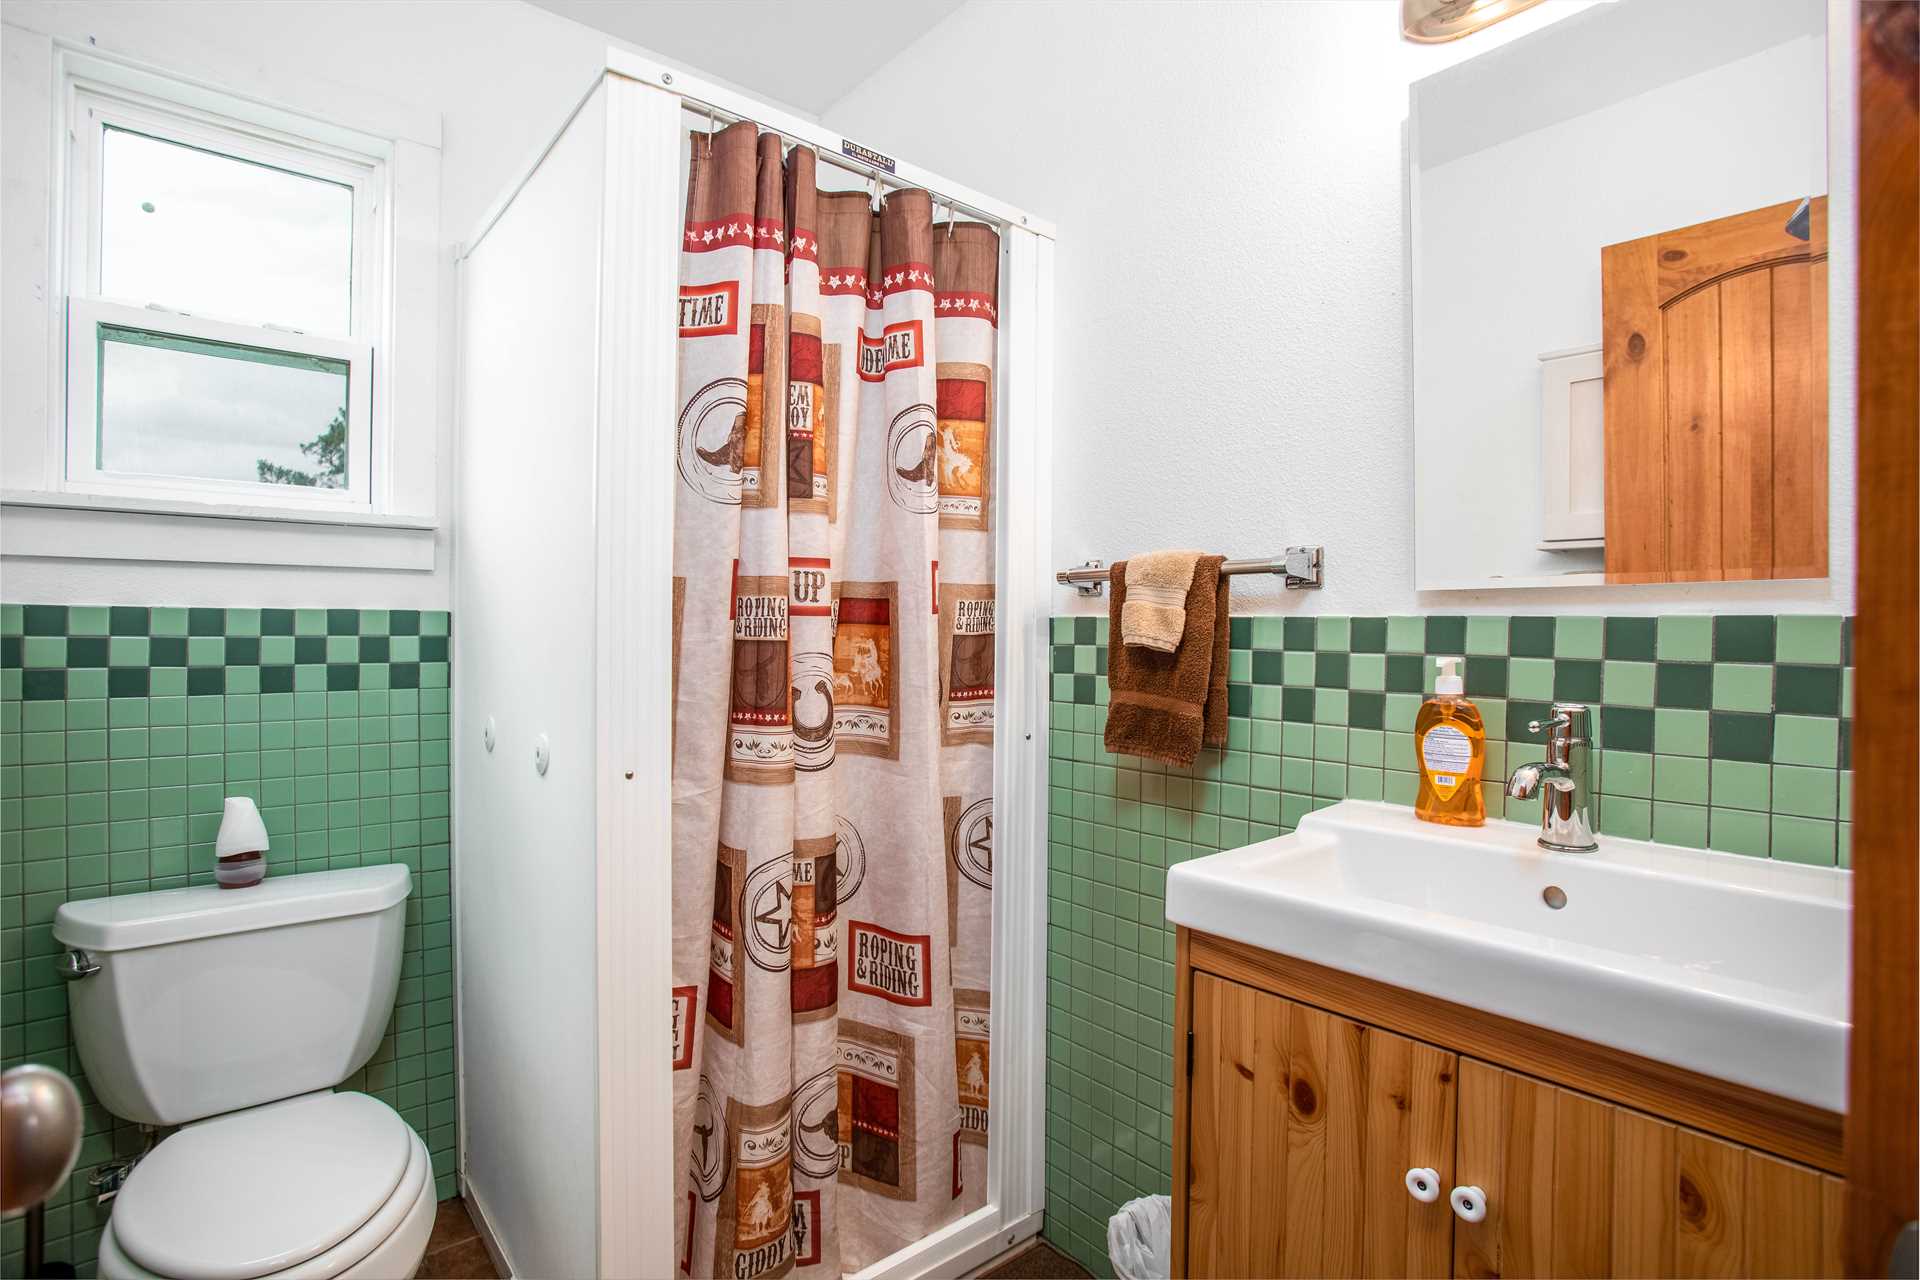                                                 Two spotlessly-clean full bathrooms give you ample cleanup space, and both baths are furnished with fresh linens, too!